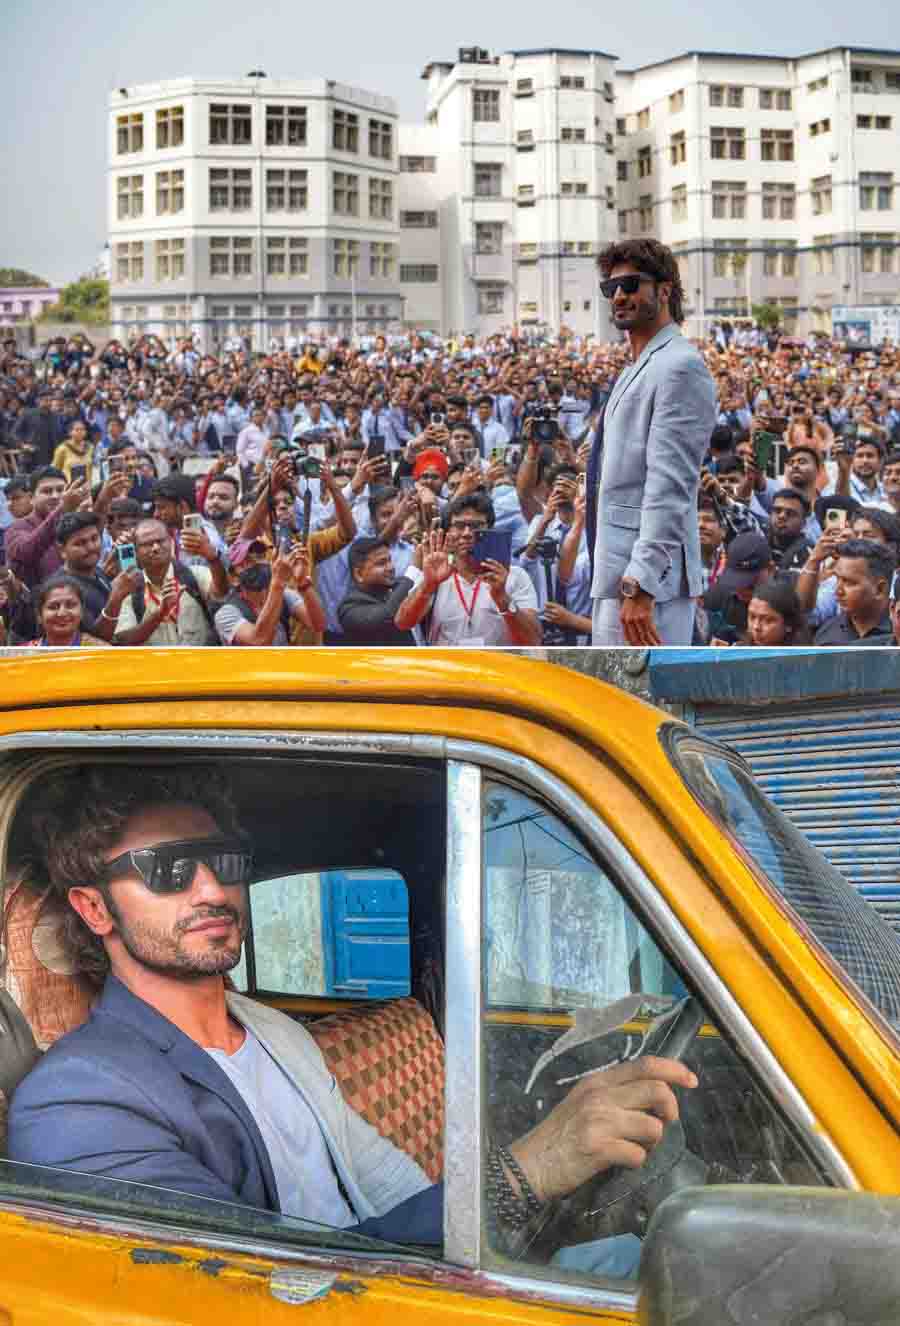 Actor Vidyut Jammwal was in Kolkata to promote his new film 'Crakk: Jeetegaa toh Jiyegaa'. He interacted with fans and enjoyed Bengali snacks and sweets at roadside stalls  